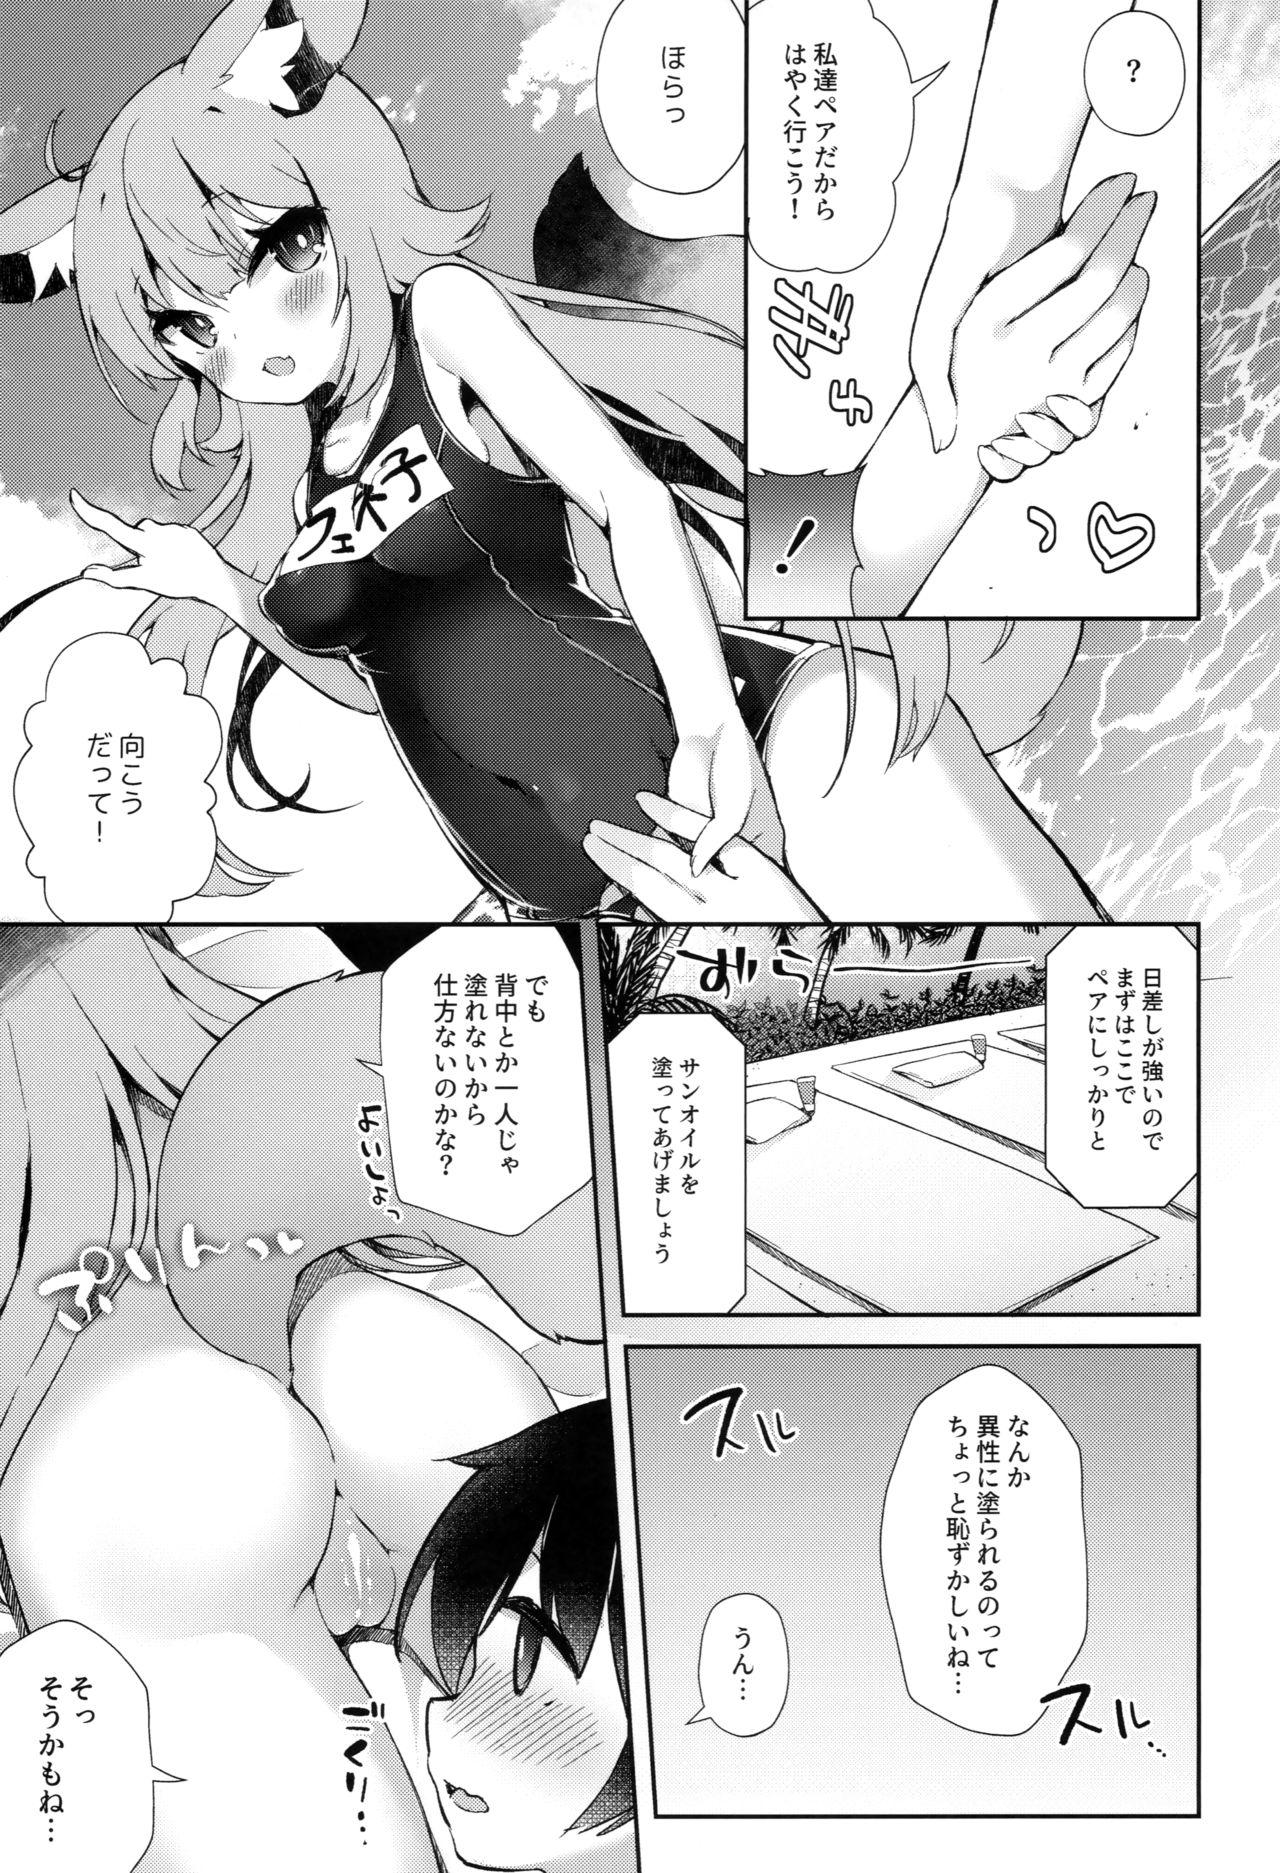 Free 18 Year Old Porn Fennec Musume Summer! - Original Indian - Page 6